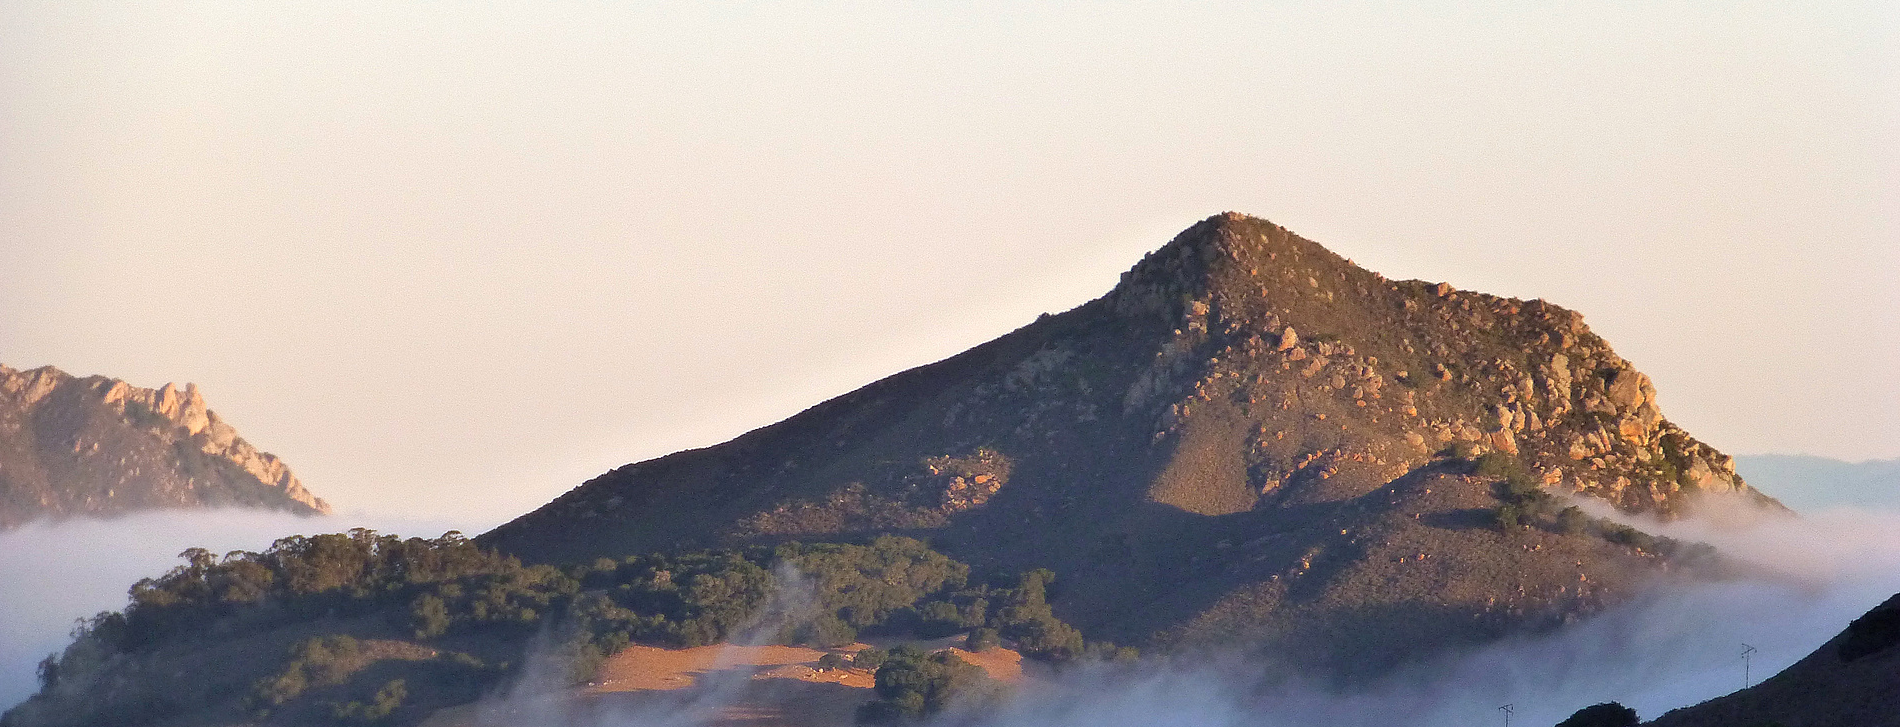 Cerro Ramauldo, one of the nine rocky peaks in San Luis Obispo County. Depicts a mountain with oak trees and large granite blocks. Click to view article, County of San Luis Obispo Closed the Oklahoma Parking Site